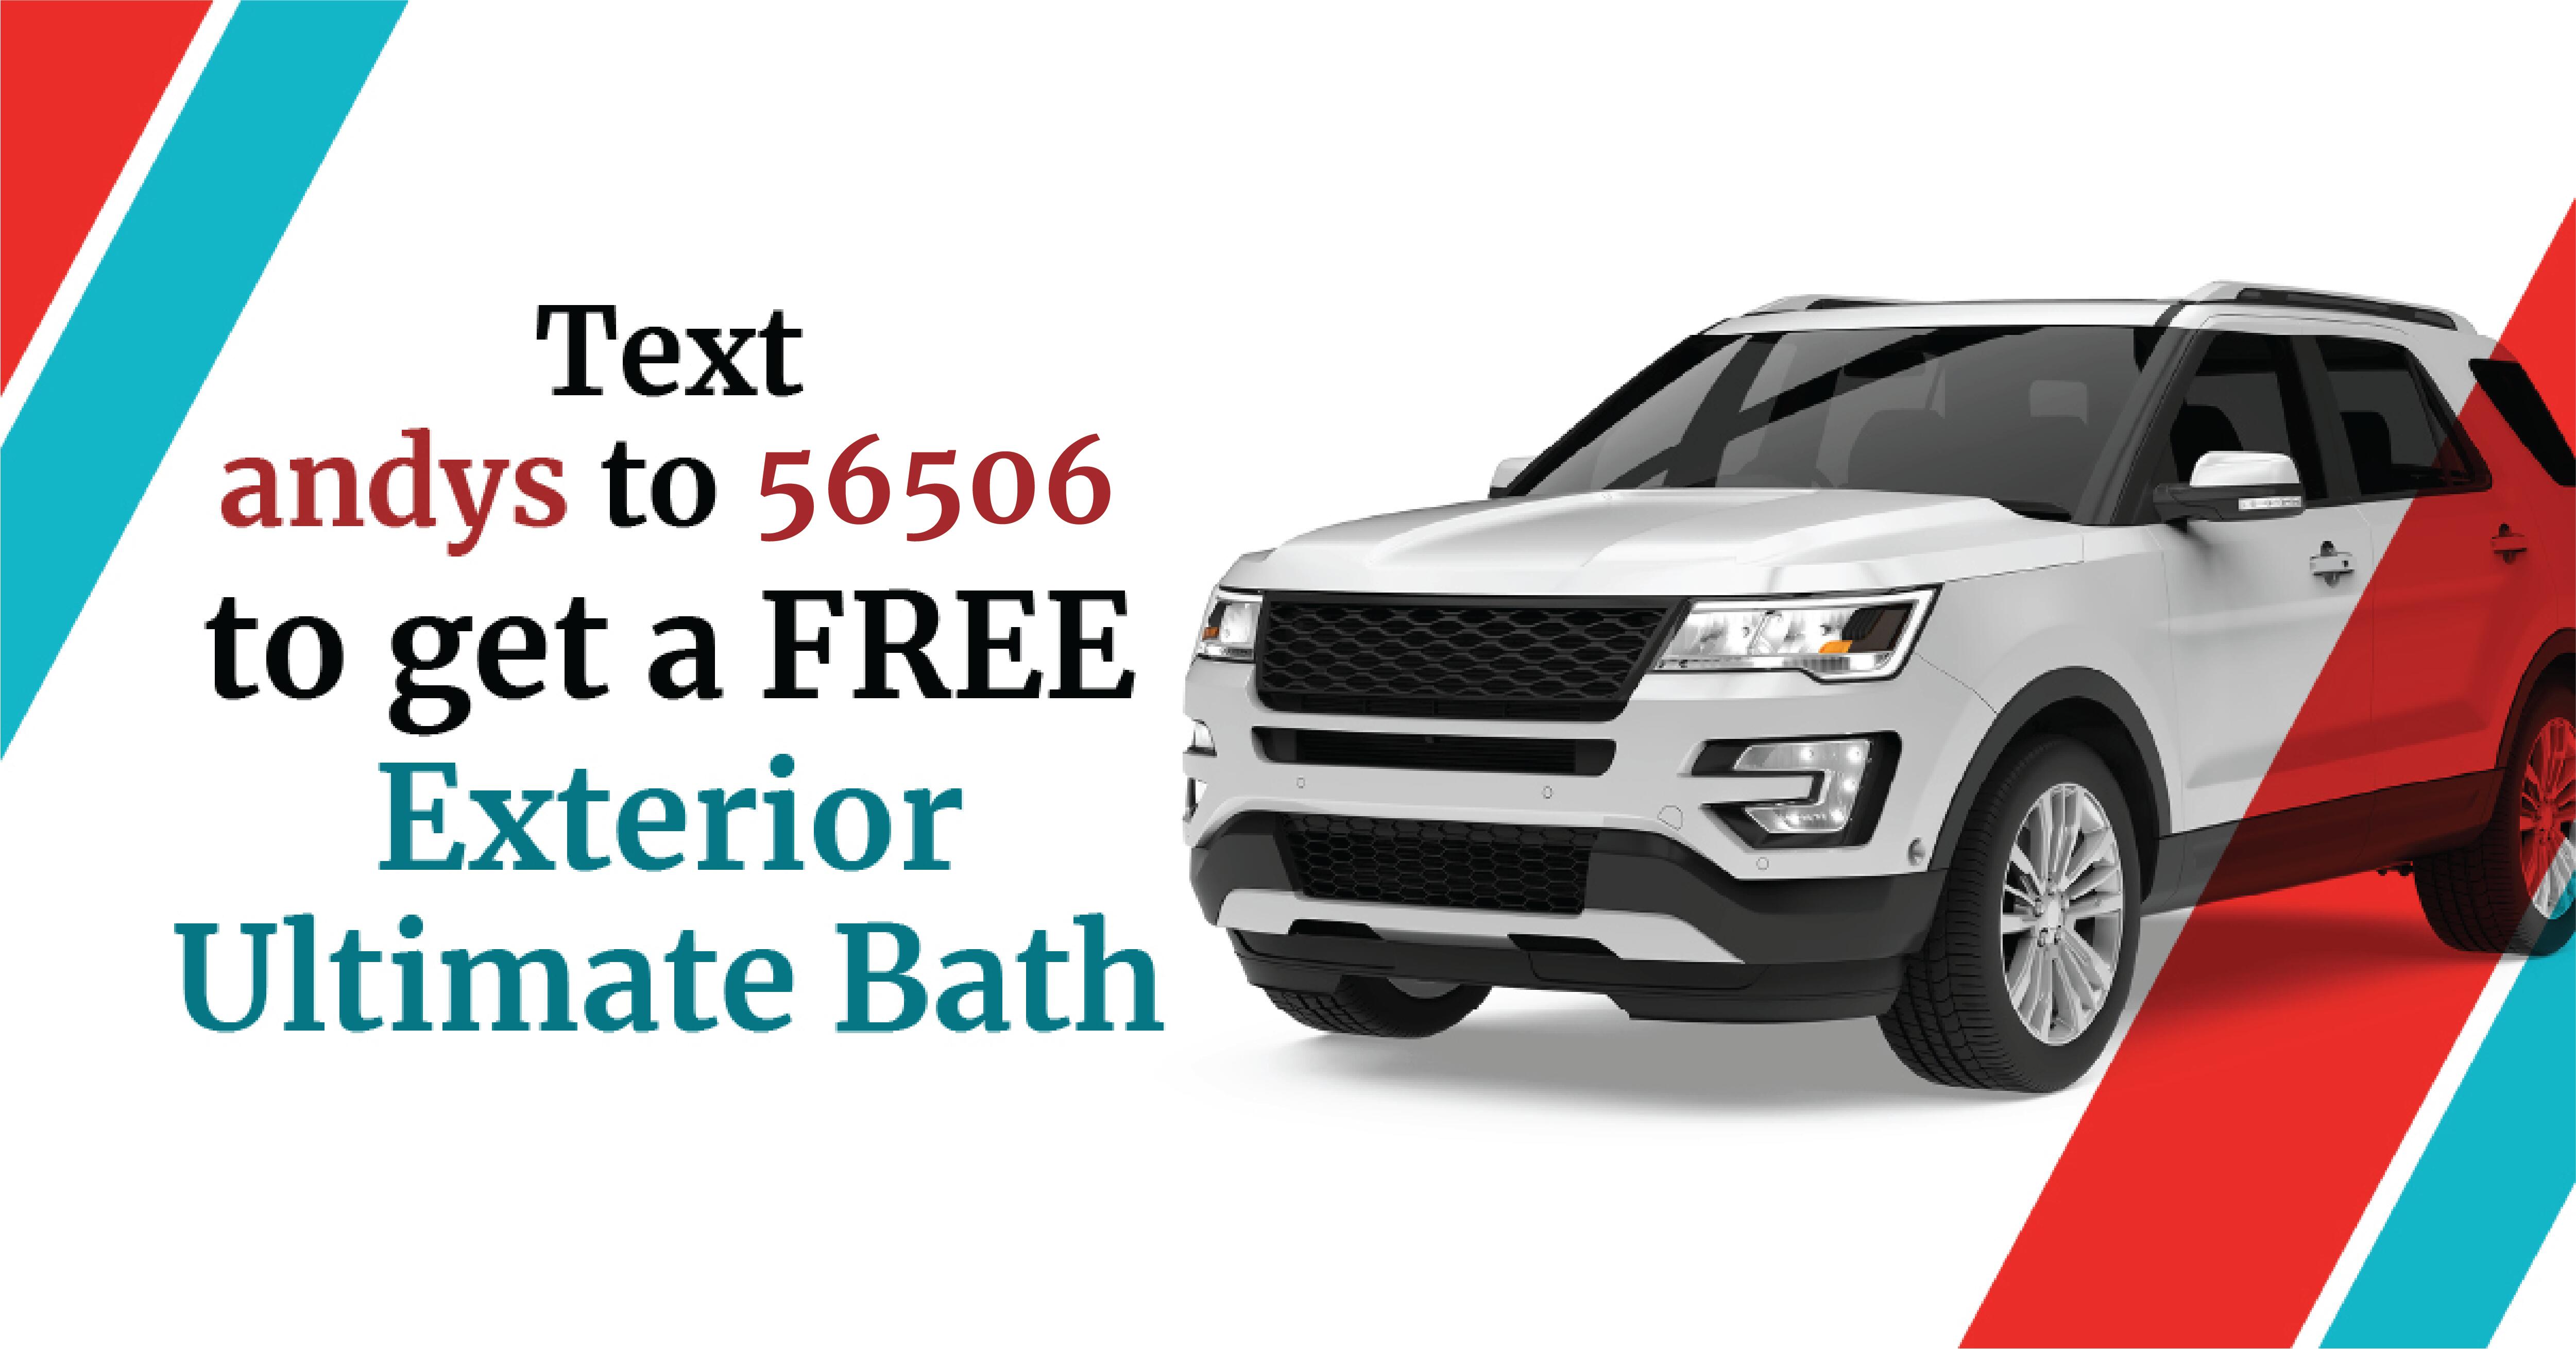 text 'andys' to 55678 and get a free exterior ultimate bath car wash of $18 value